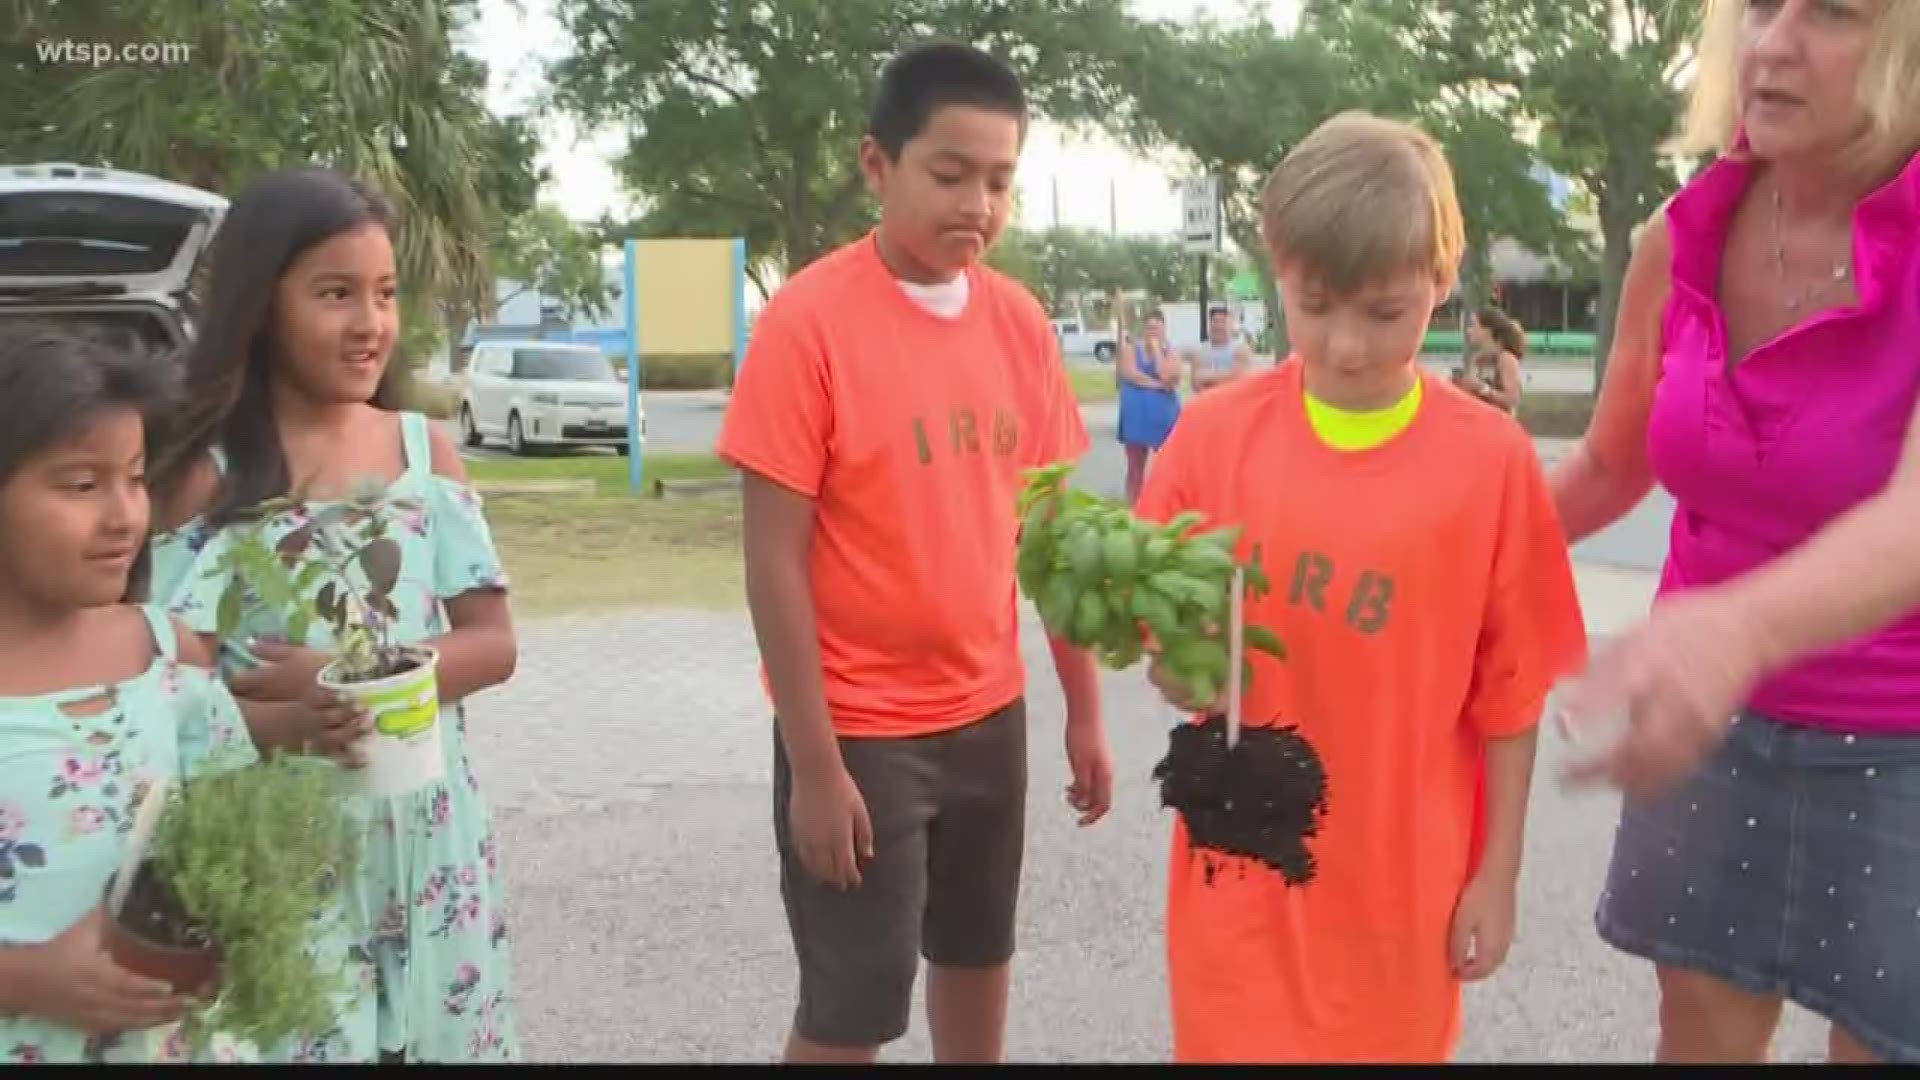 Indian Rocks Beach now has mini community gardens filled with free produce around their community. 

Mayor Cookie Kennedy said she didn’t need a land grant or funding to make this possible, just donations, volunteers and a drive to increase healthy options.